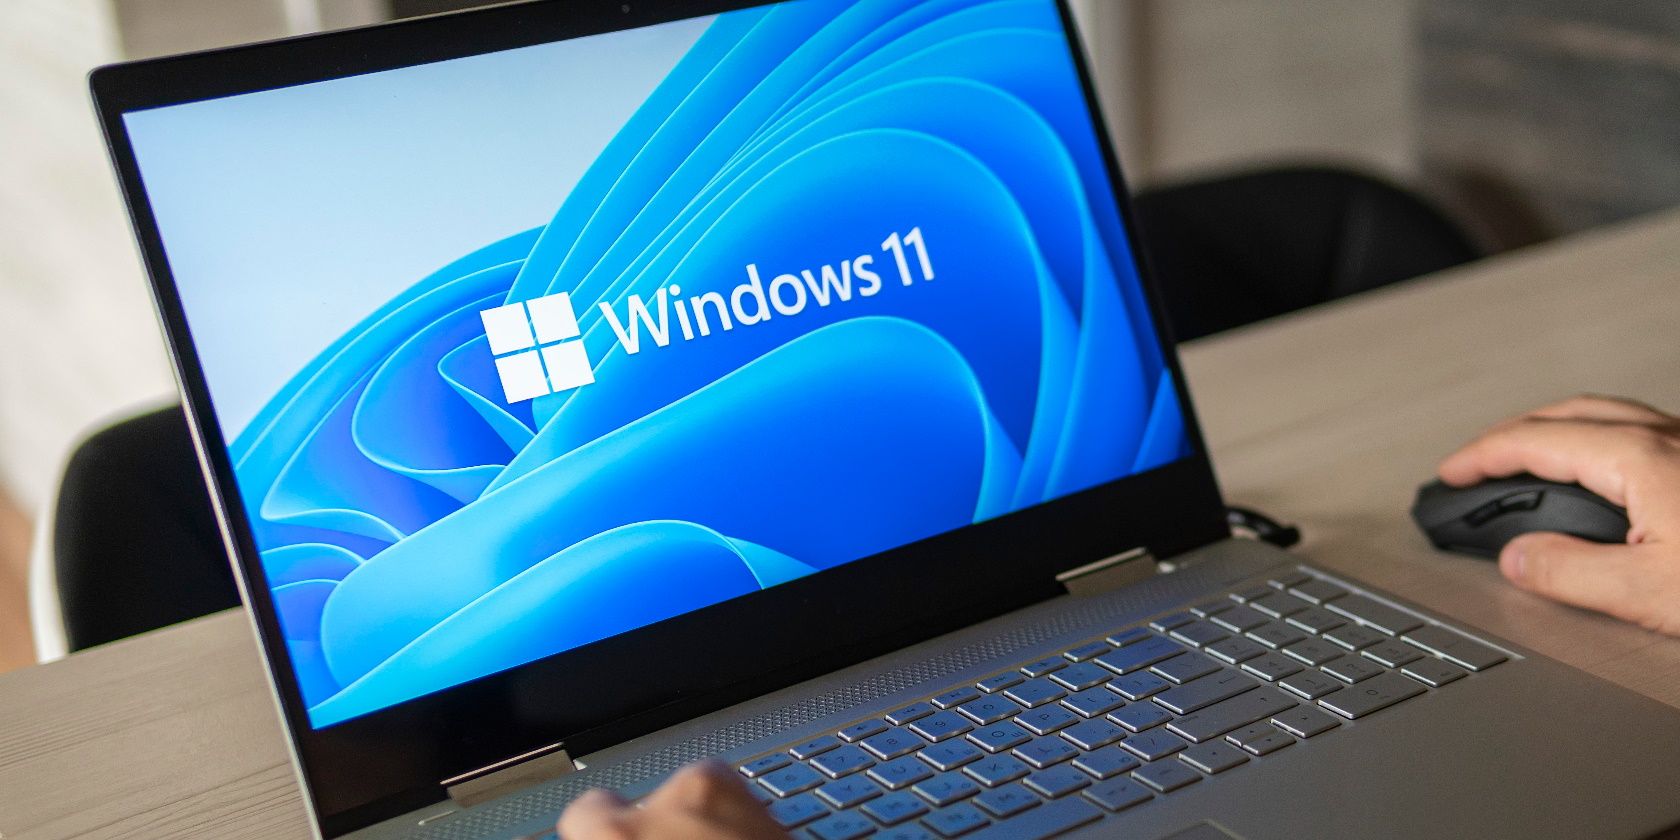 How to Fix Windows 11 When It Keeps Restarting